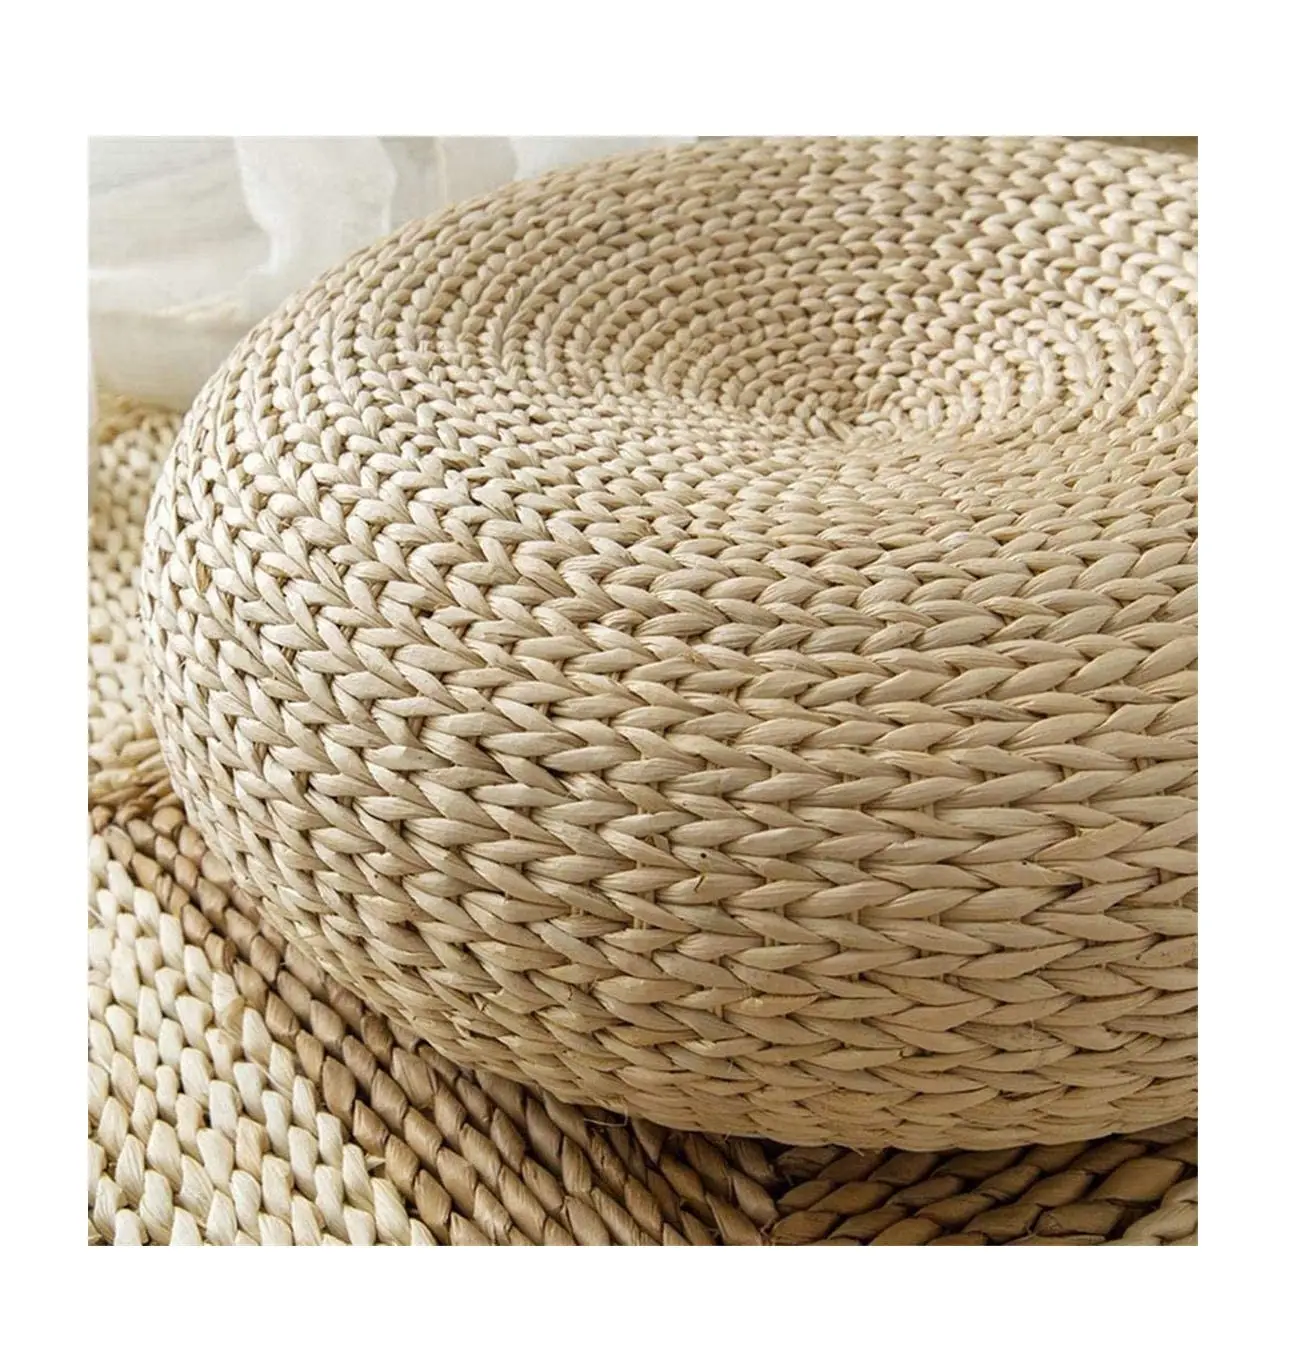 Water Hyacinth Pillow Rustic Straw Pouf Ottoman for Meditation Straw Cushion for Picnic Seat Pad HUNG TAM VN from Vietnam